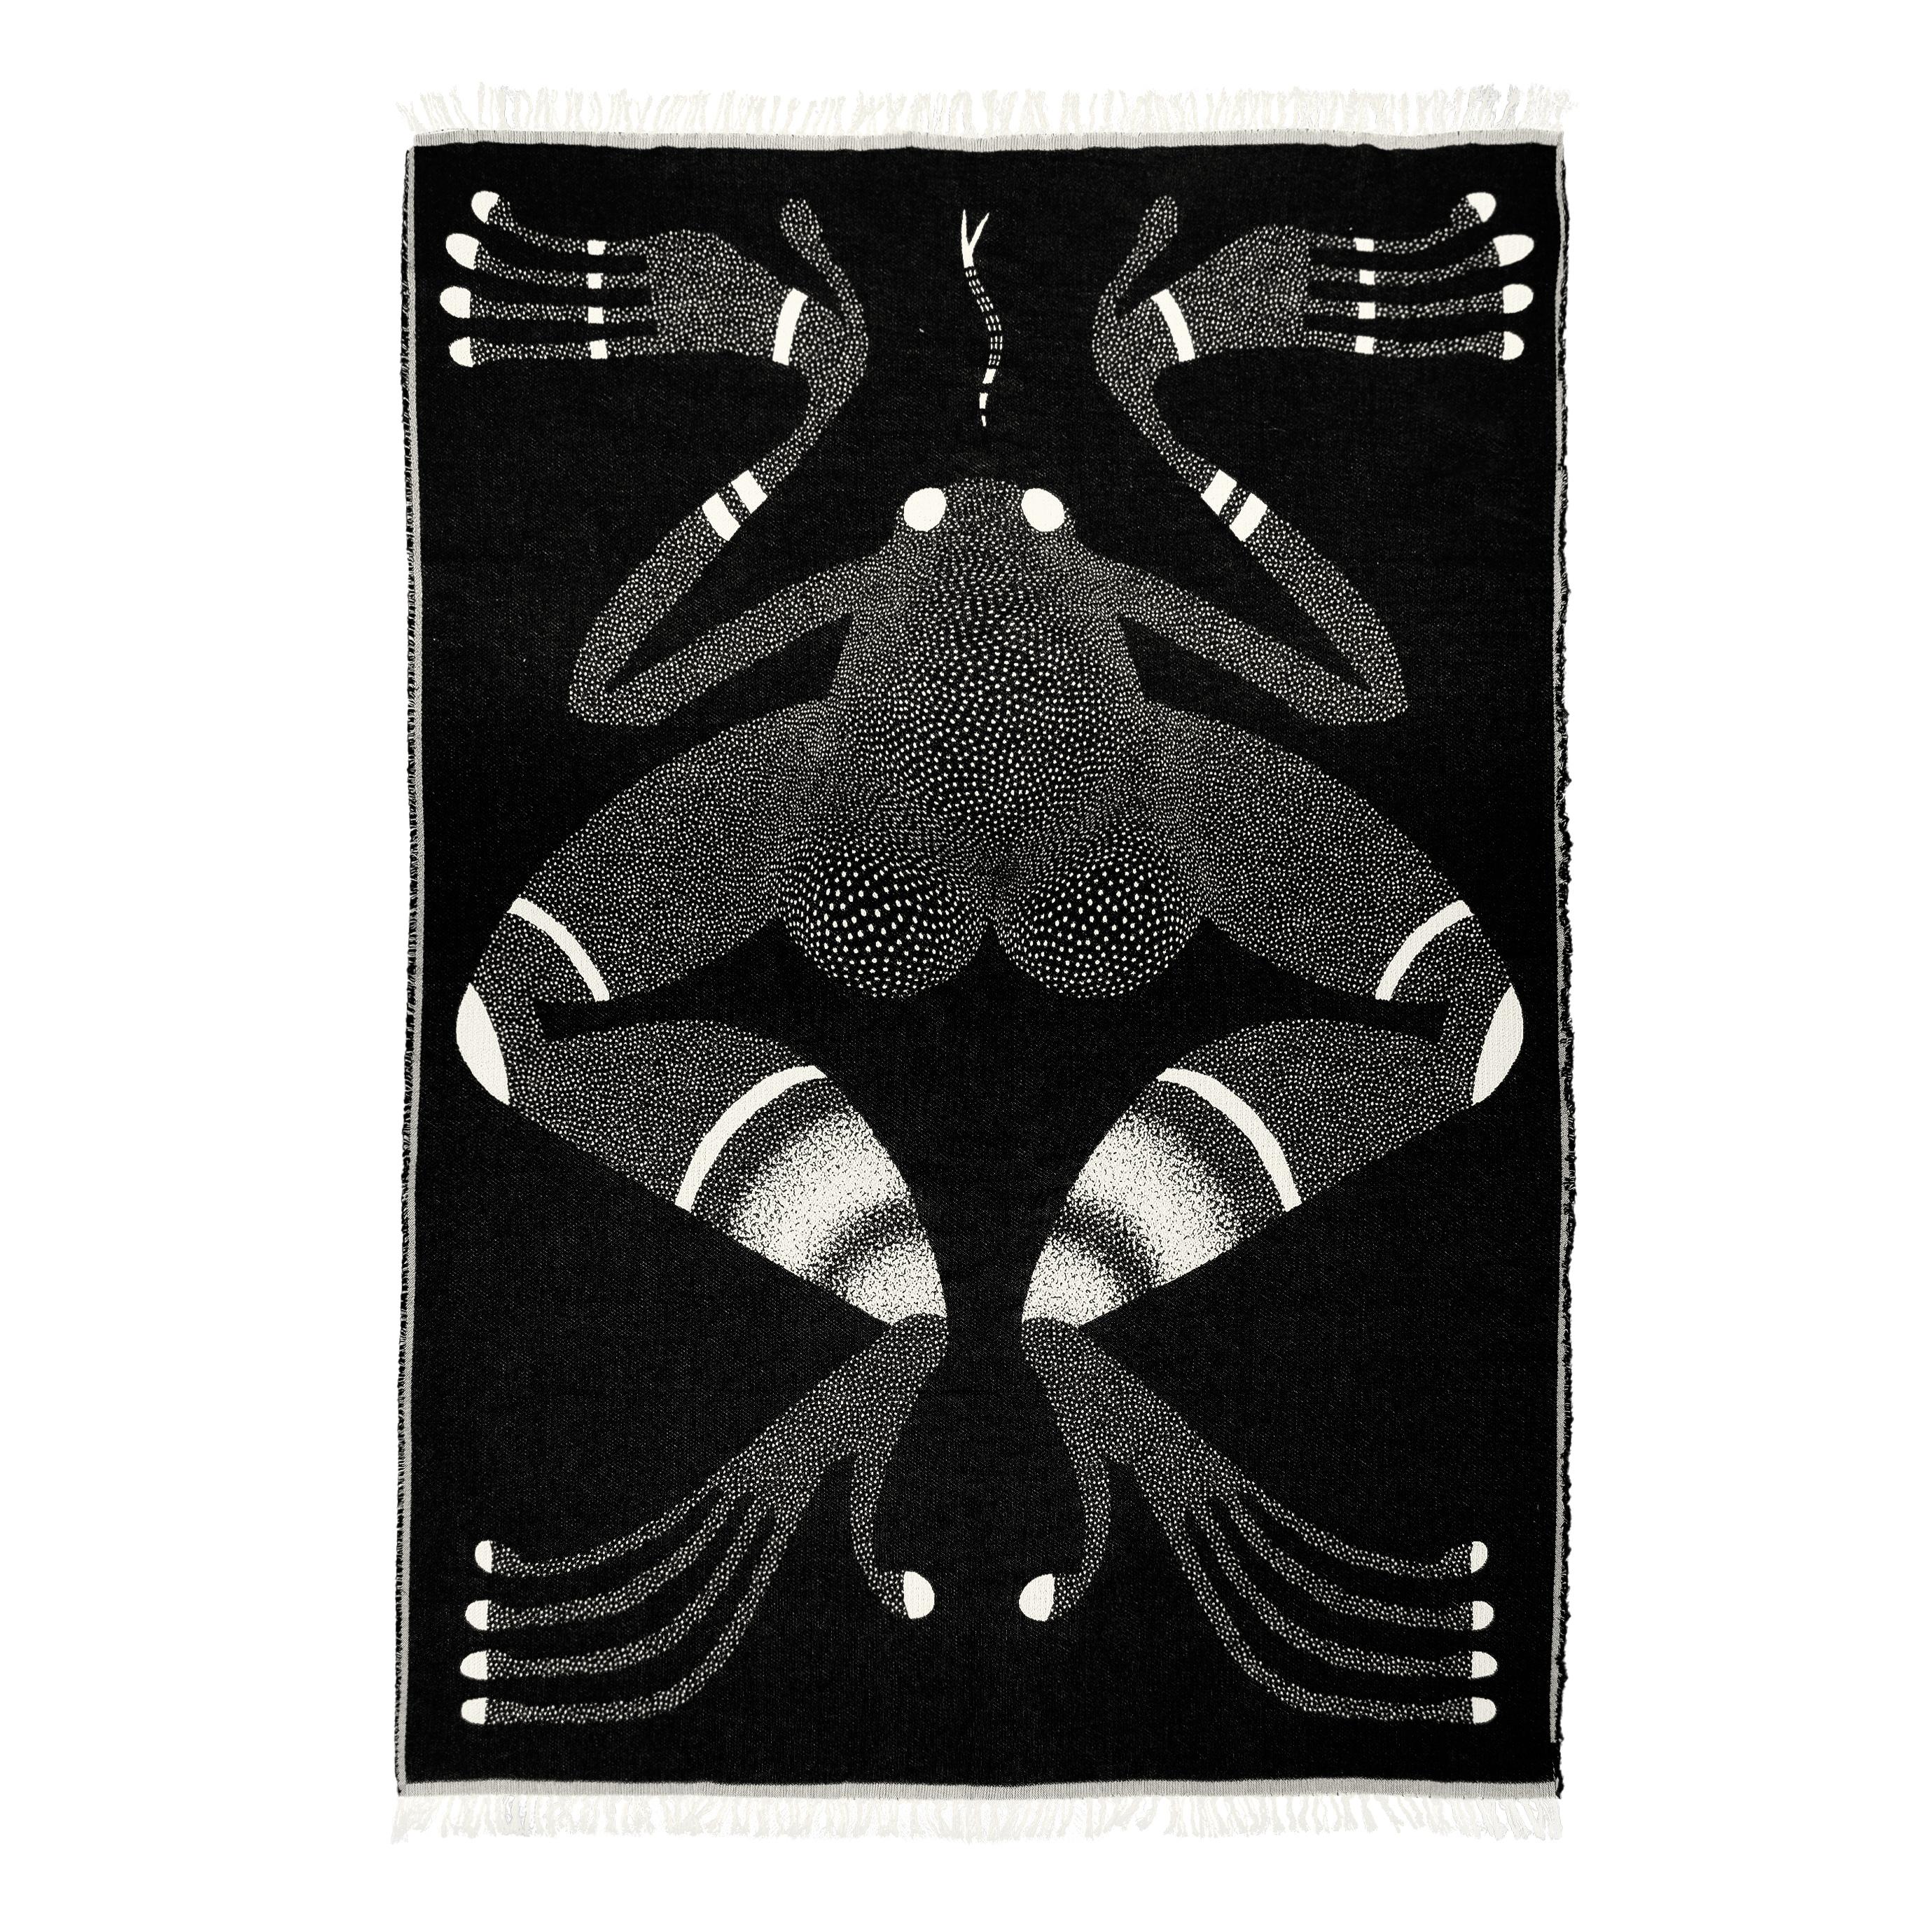 Beautiful cotton jacquard frog blanket by Barbara Janczak.

The Animals series includes soft cotton blankets and bedspreads with intriguing patterns with animal motifs. Or maybe human ones? The heroes of this series refer to Eastern iconography. The